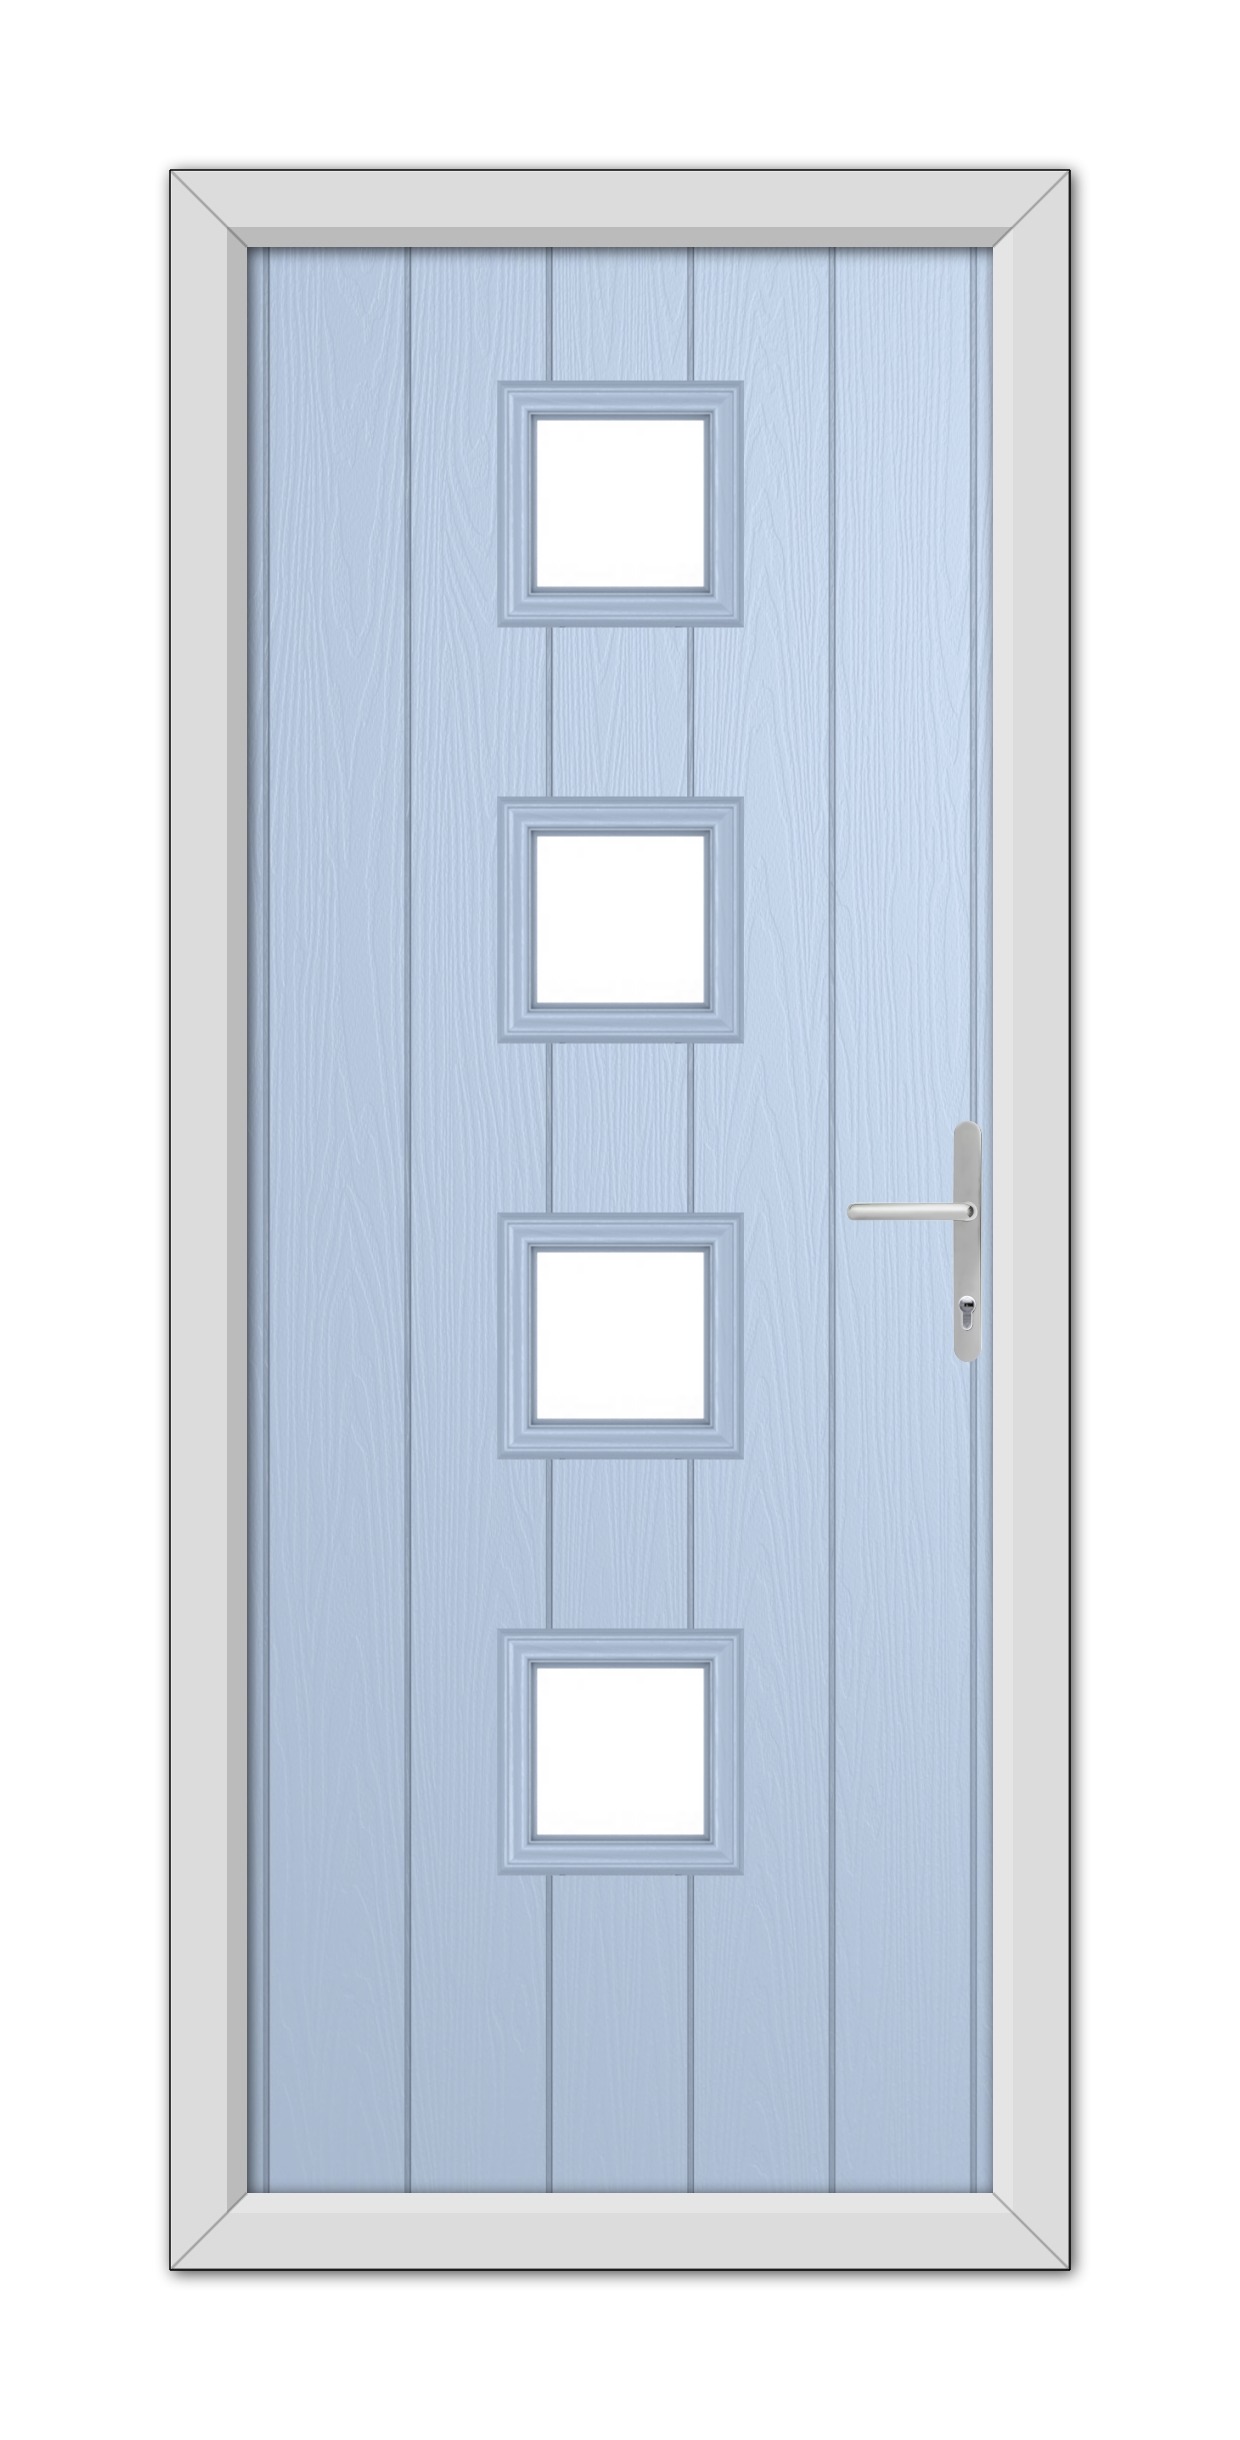 A modern Duck Egg Blue Hamilton Composite Door featuring four rectangular glass panels and a silver handle, set within a white frame.